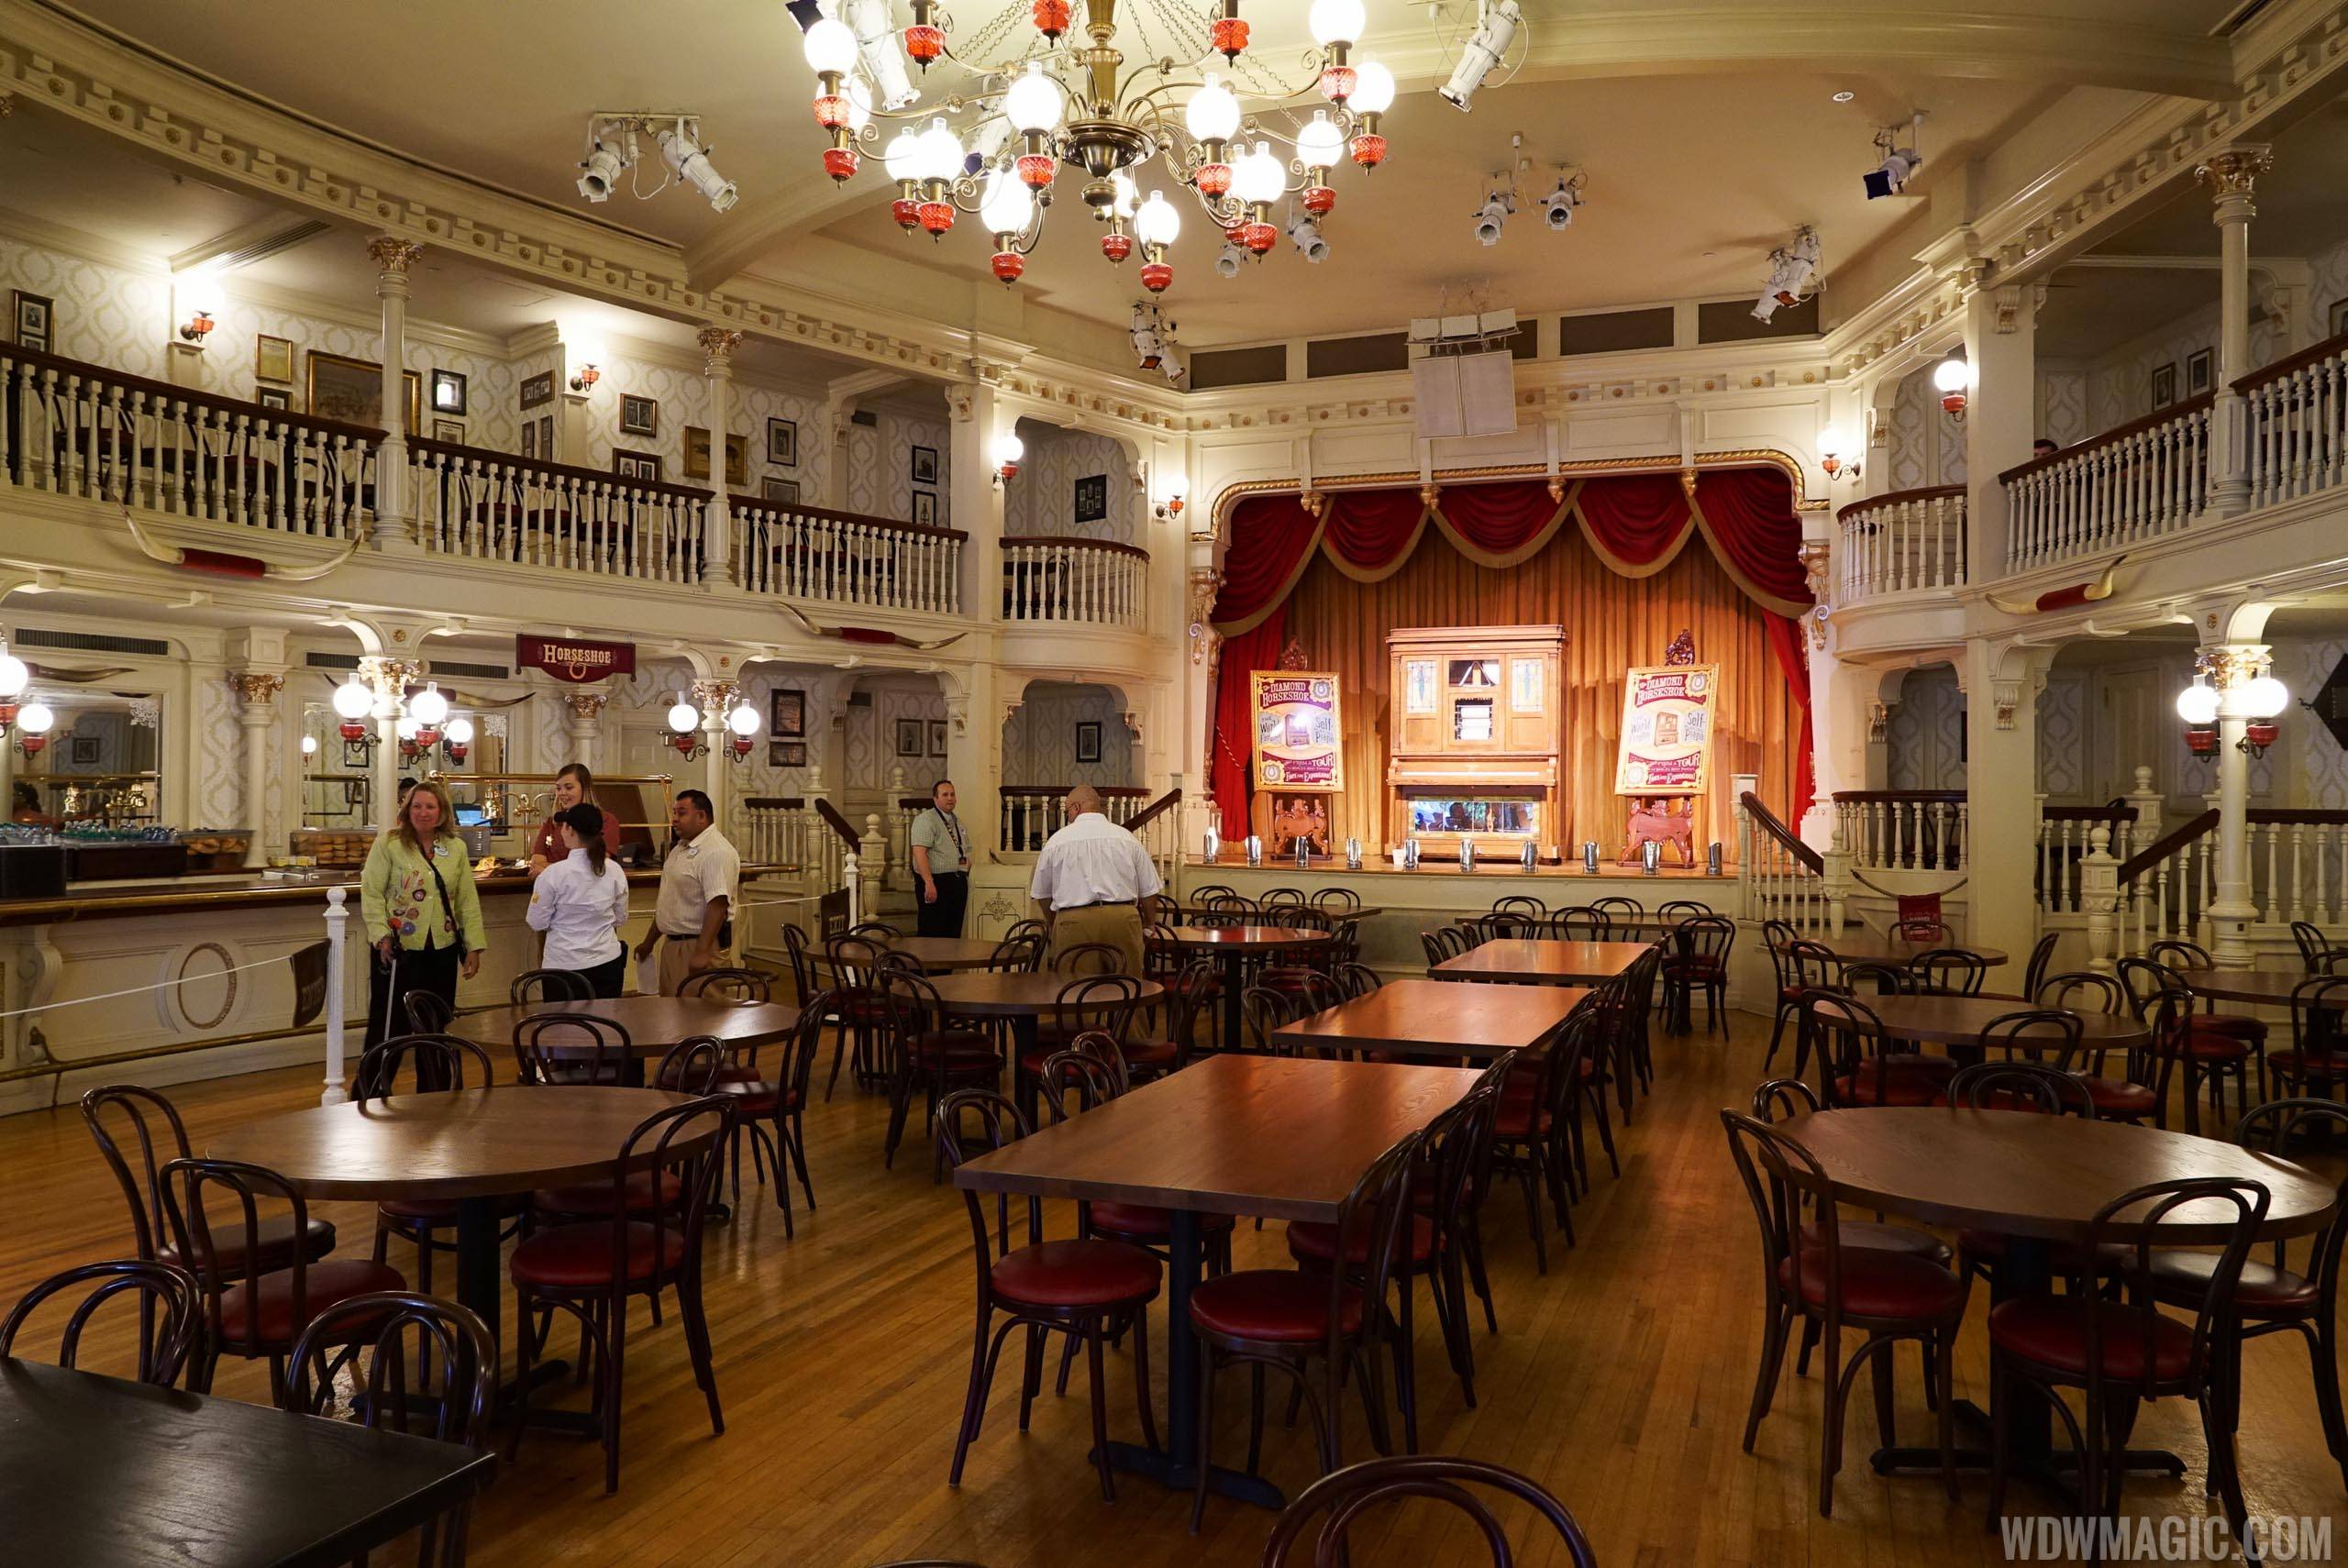 The Diamond Horseshoe opening for dinner during the holiday week